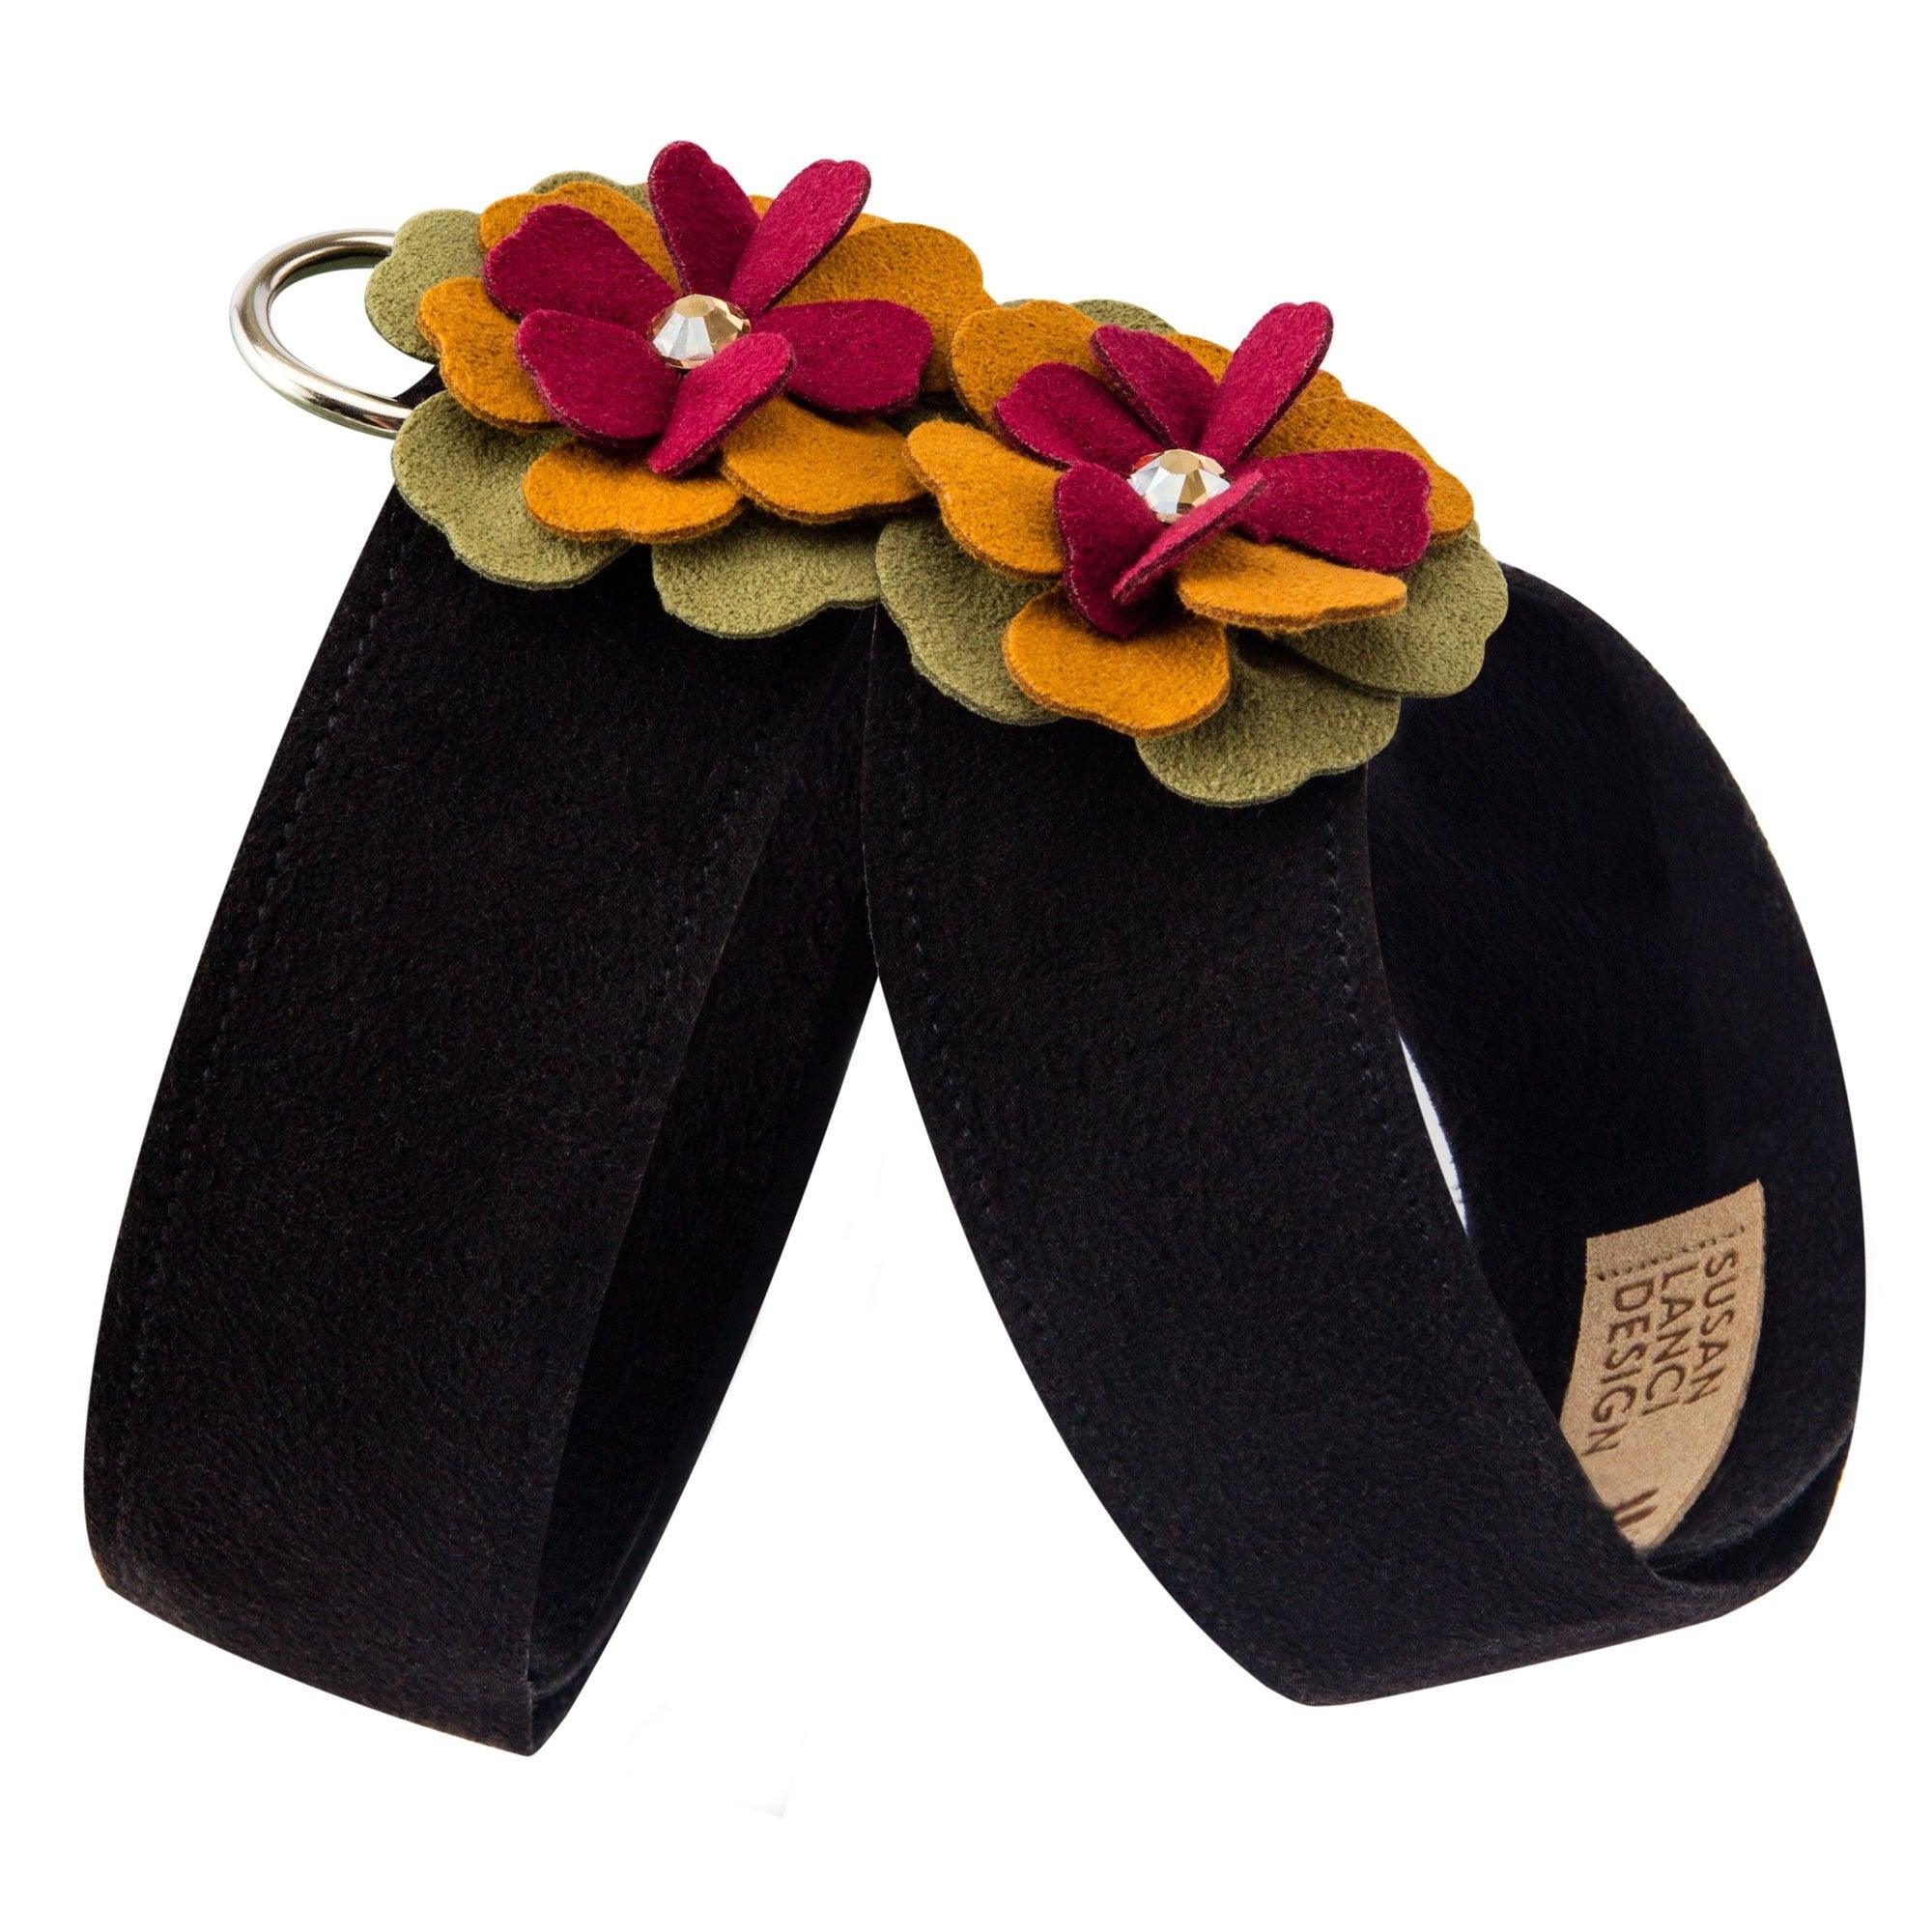 Autumn Flower Tinkie Harness - Rocky & Maggie's Pet Boutique and Salon